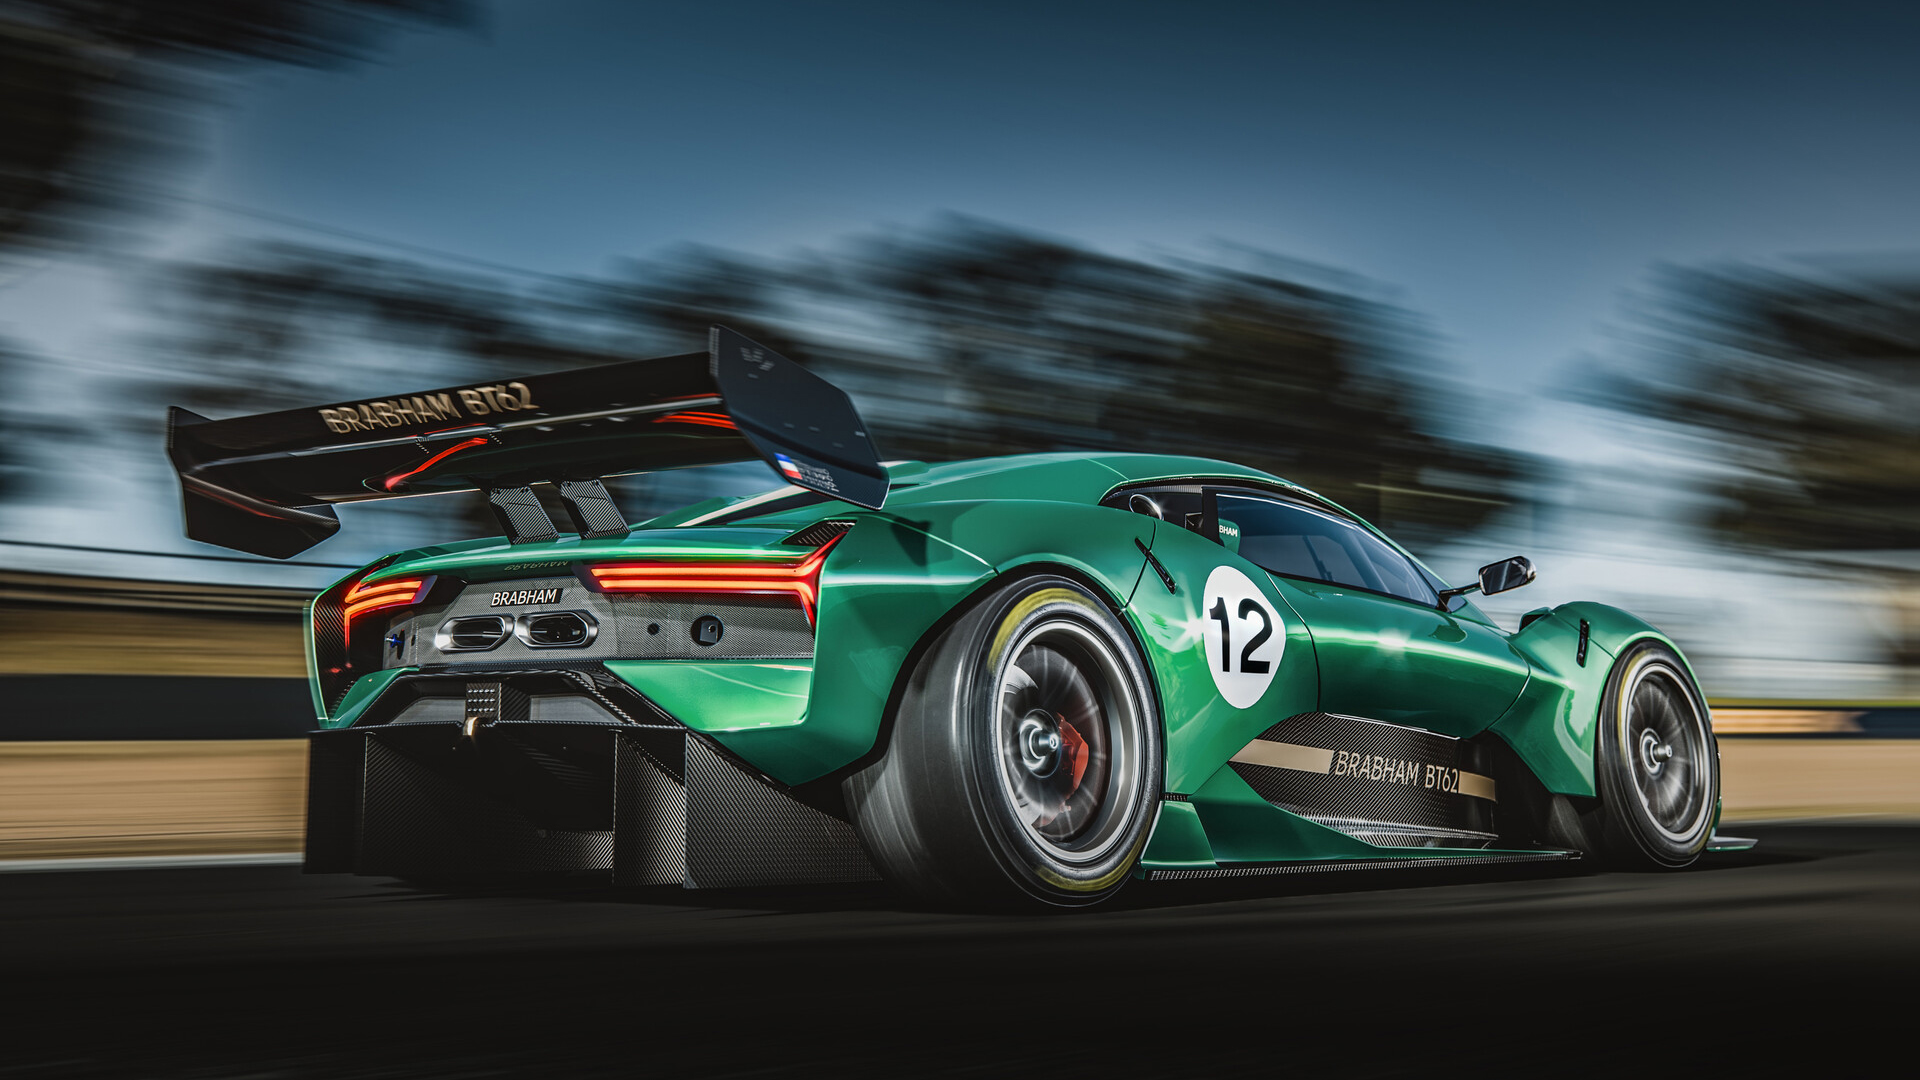 Brabham is back with the BT62 £1M hypercar - Page 7 - Car Body Design